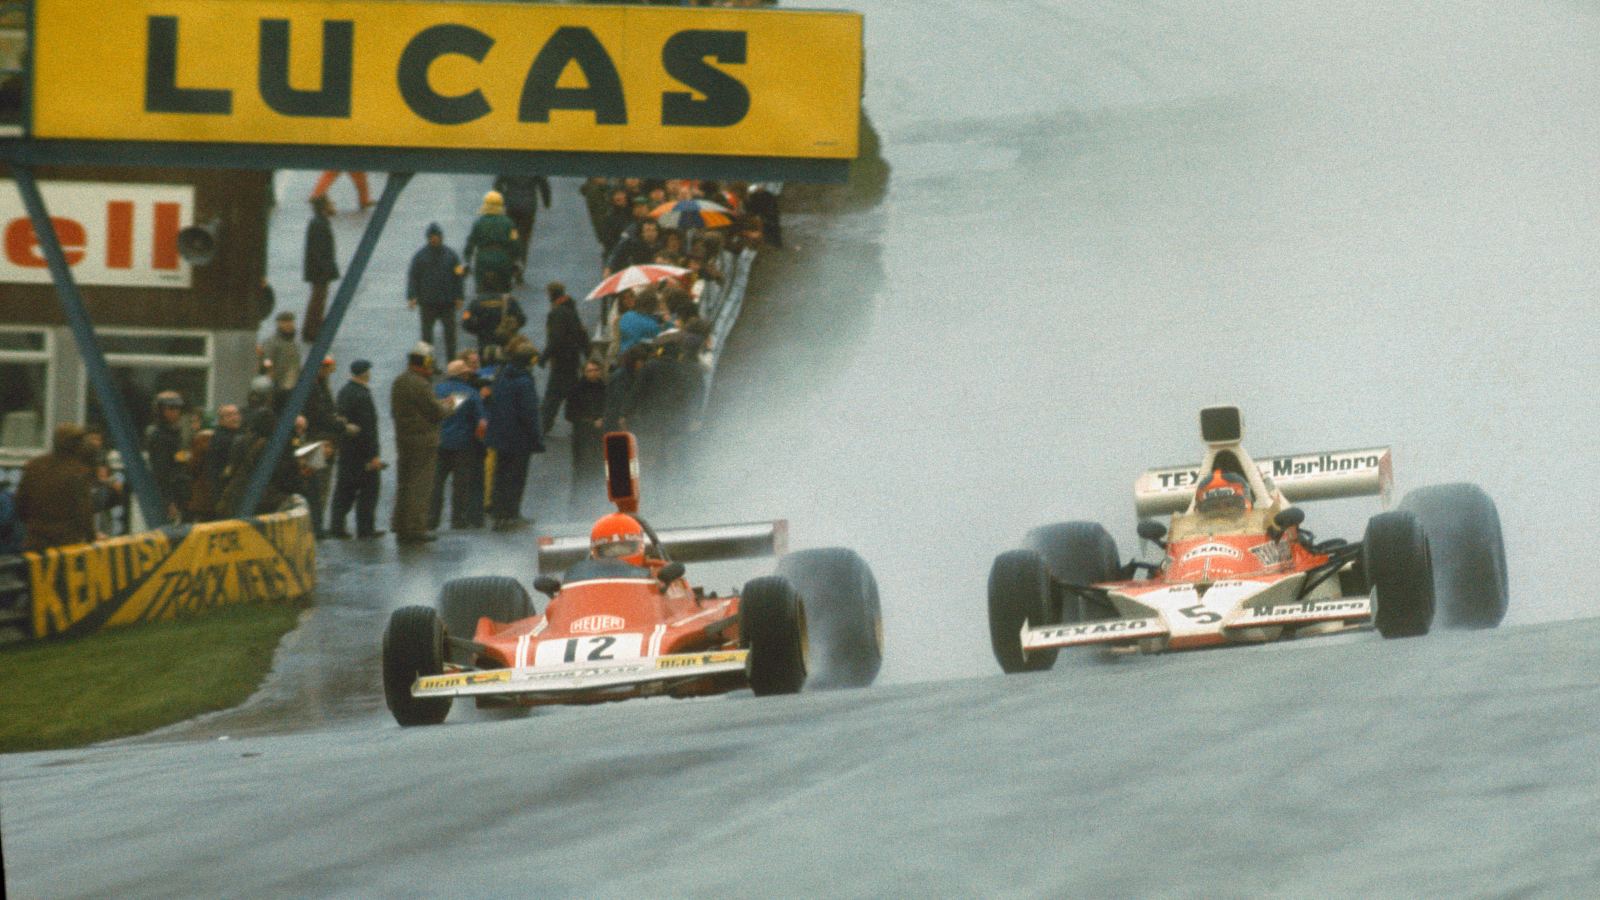 The 1974 Race of Champions, competed at Brands Hatch in the UK.